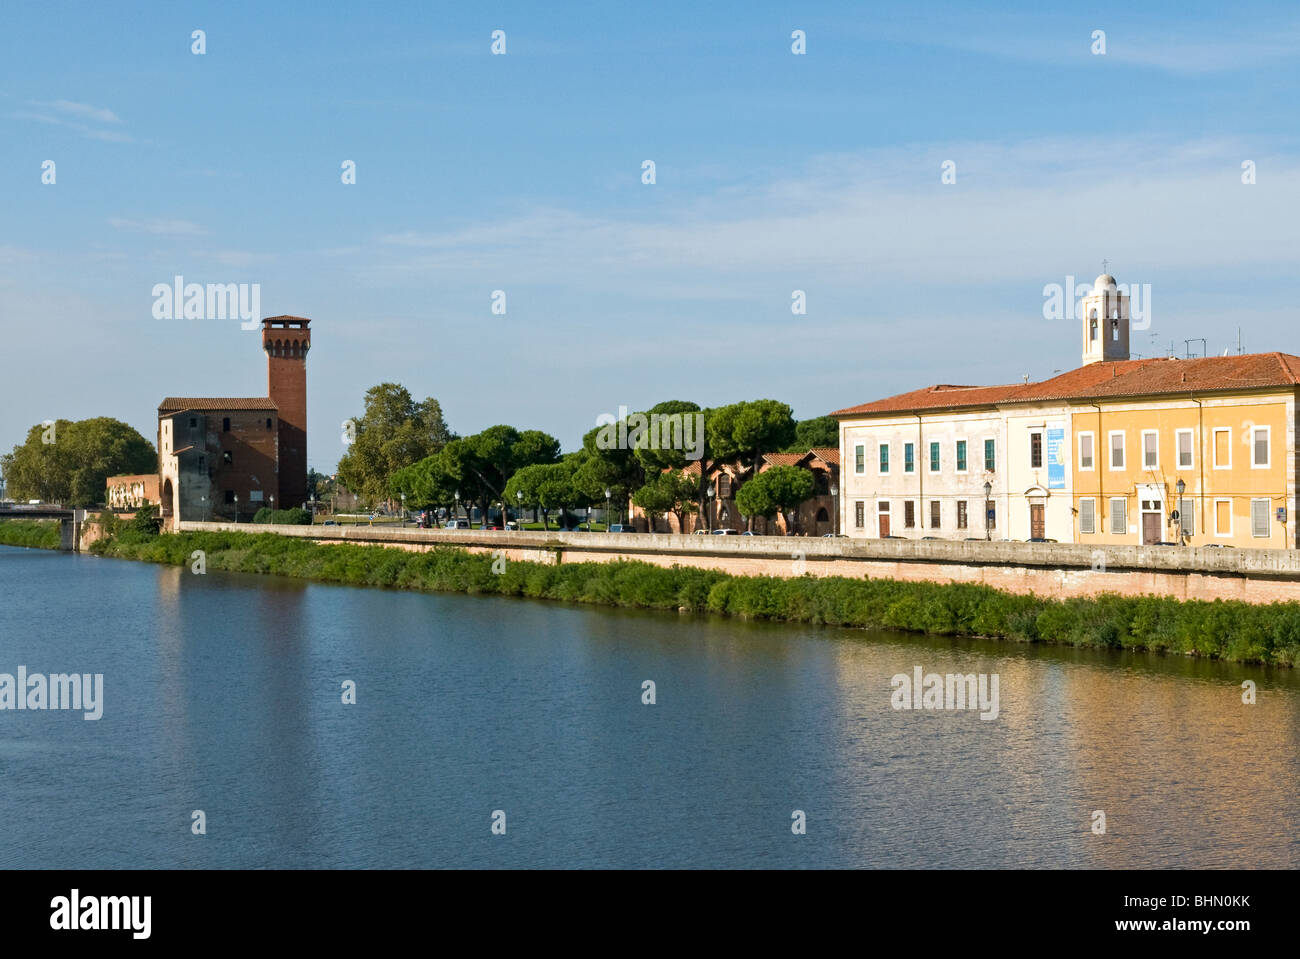 The Tower of the Citadel and Arno River, Pisa, Tuscany, Italy, Europe Stock Photo